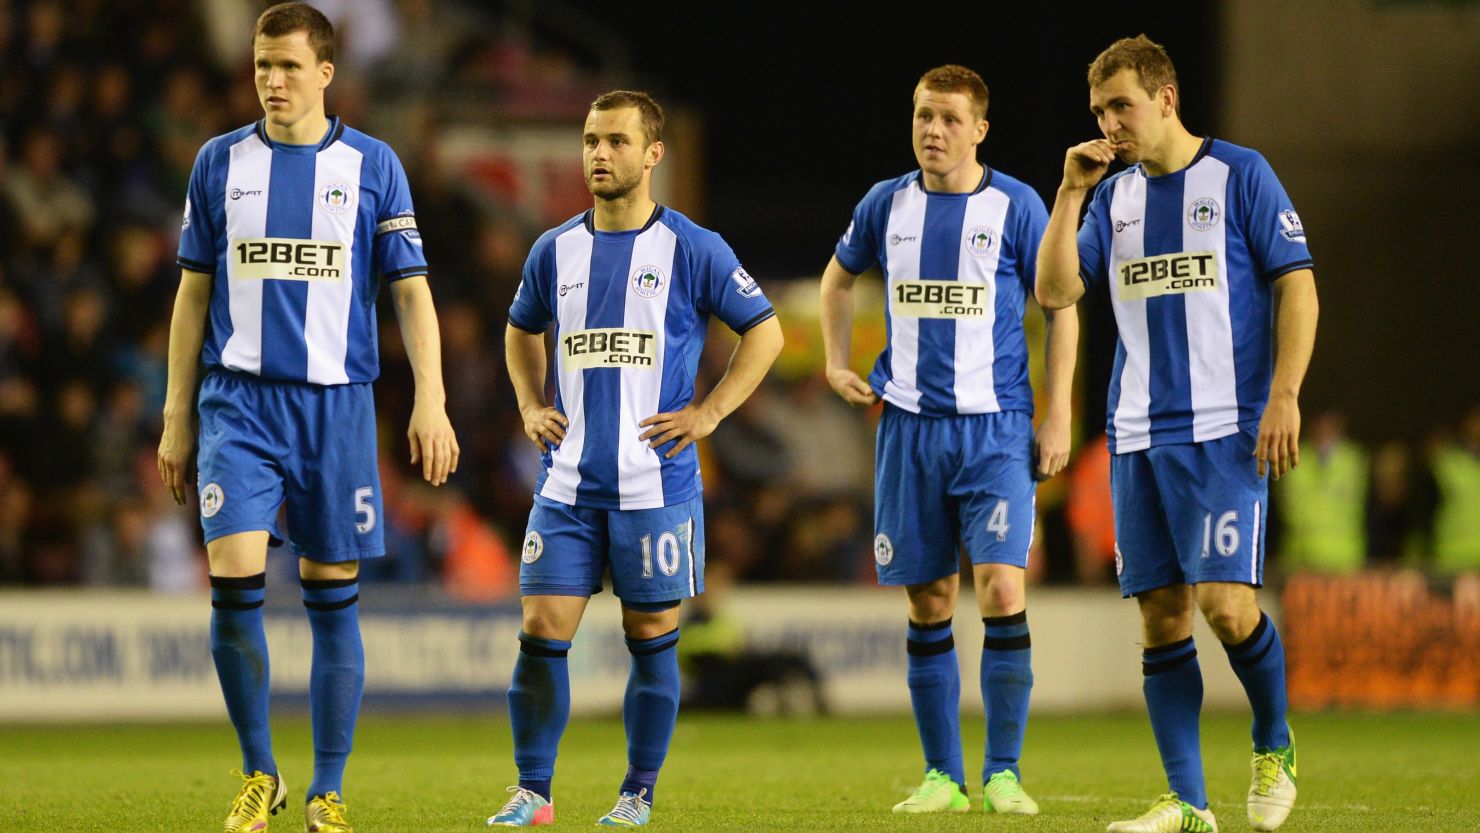 Wigan's players stand dejected after conceding against Swansea in a game they lost 3-2